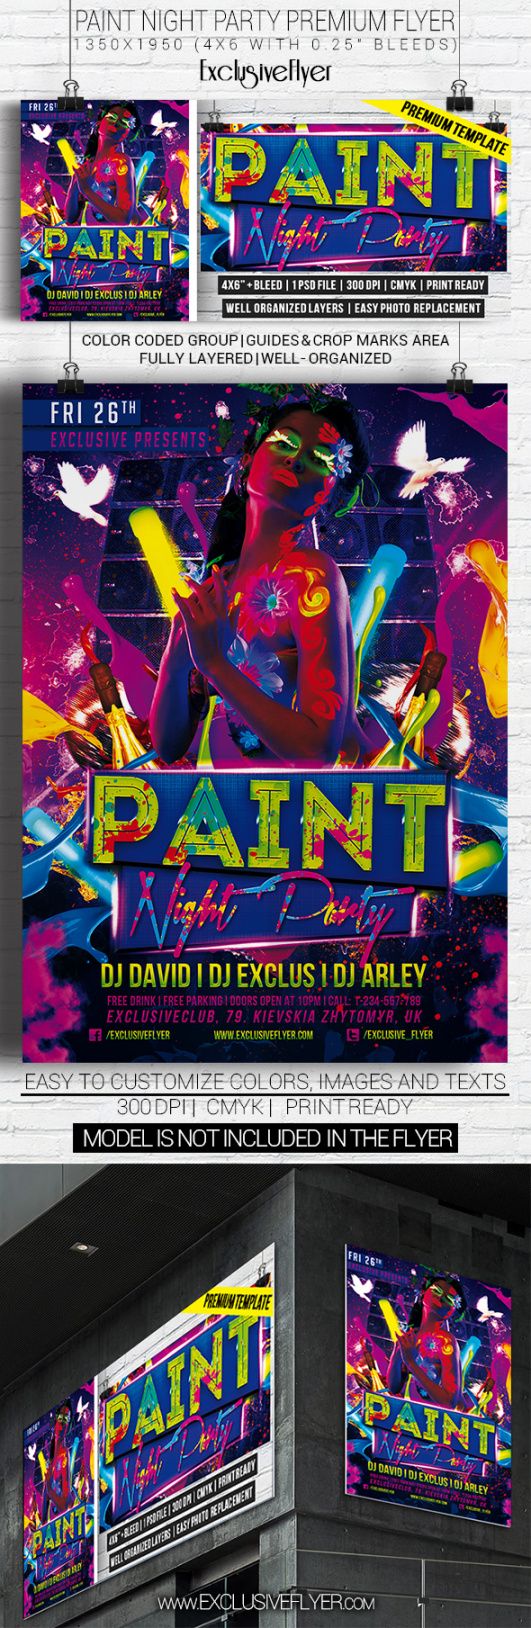 free paint night party  premium flyer template on behance paint night flyer template doc